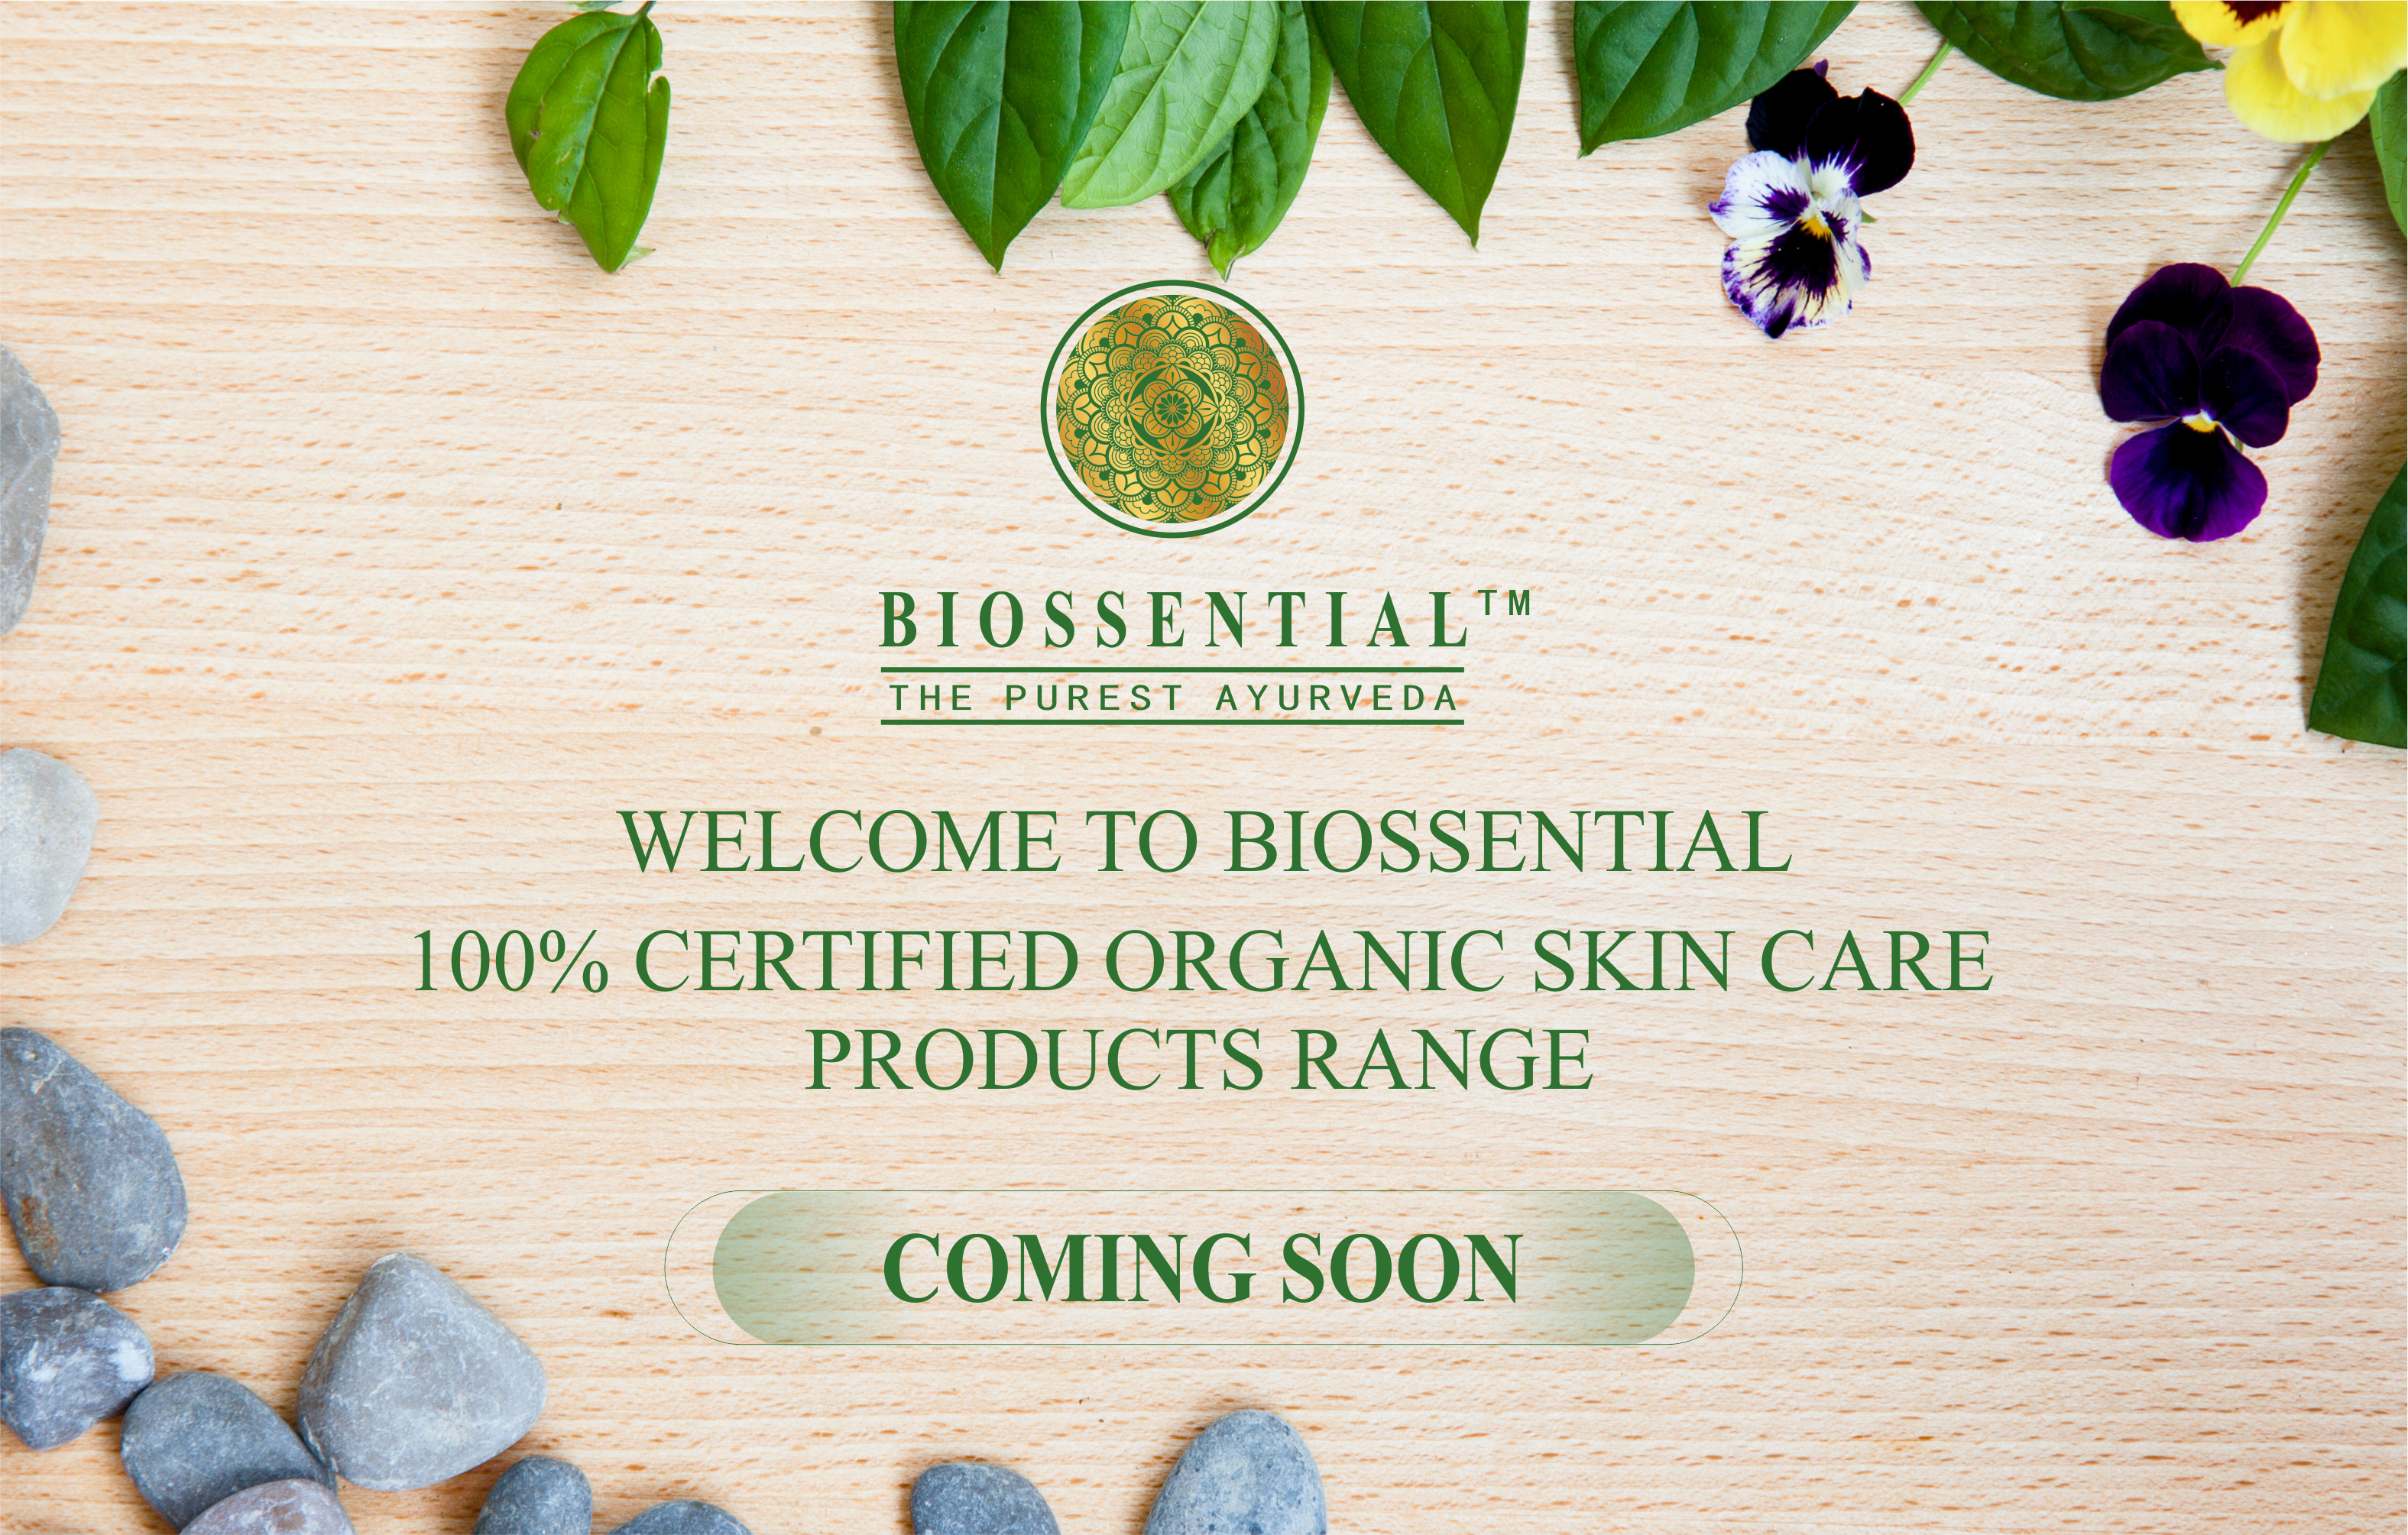 Load video: Biossential 100% Certified Organic Skin Care Products